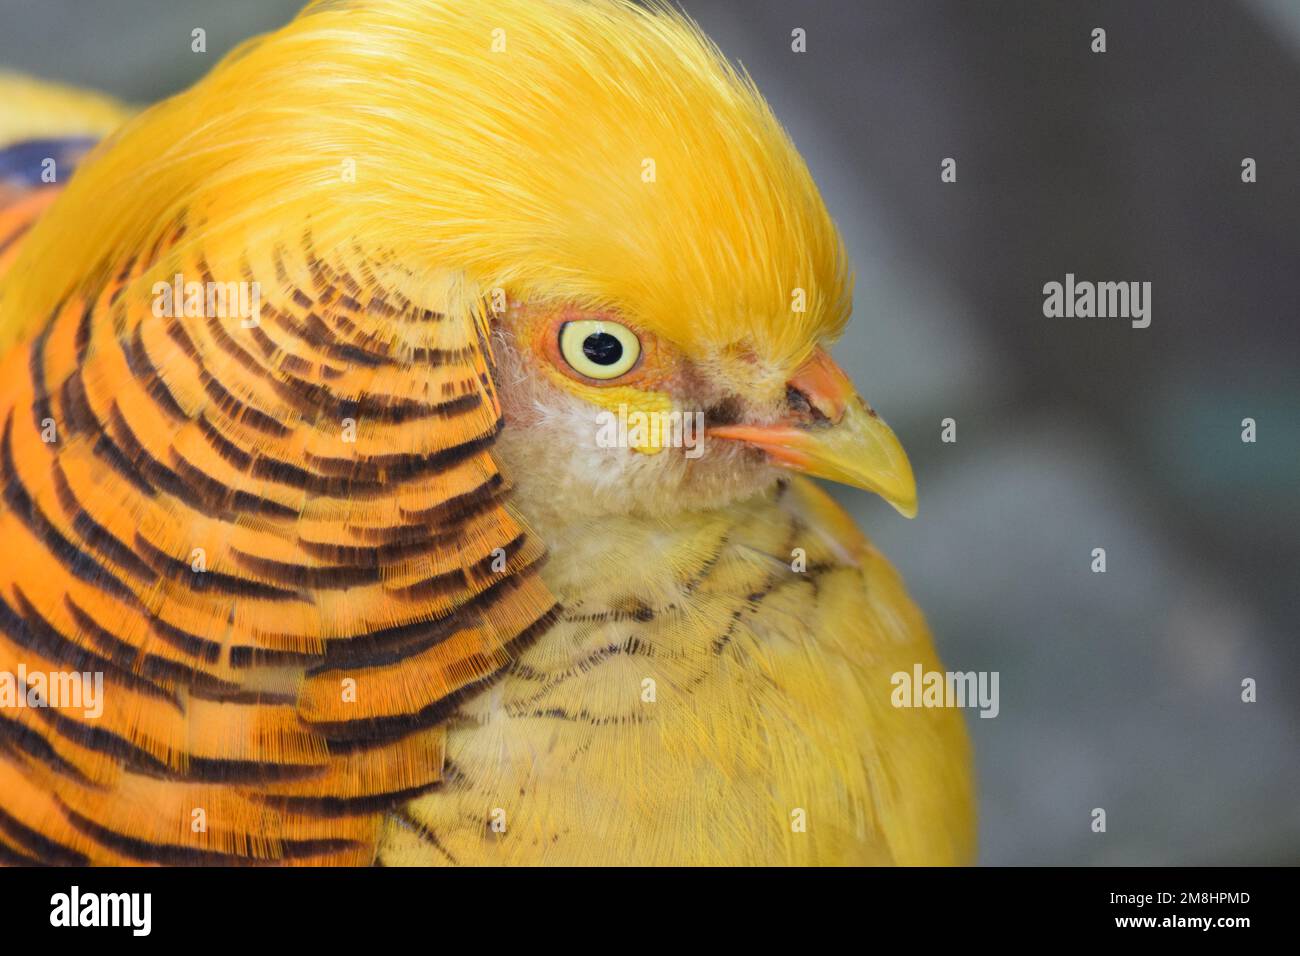 Beautiful Golden Pheasant native to China, close-up of face and head, showing concentric circles and yellow / gold crest. Stock Photo